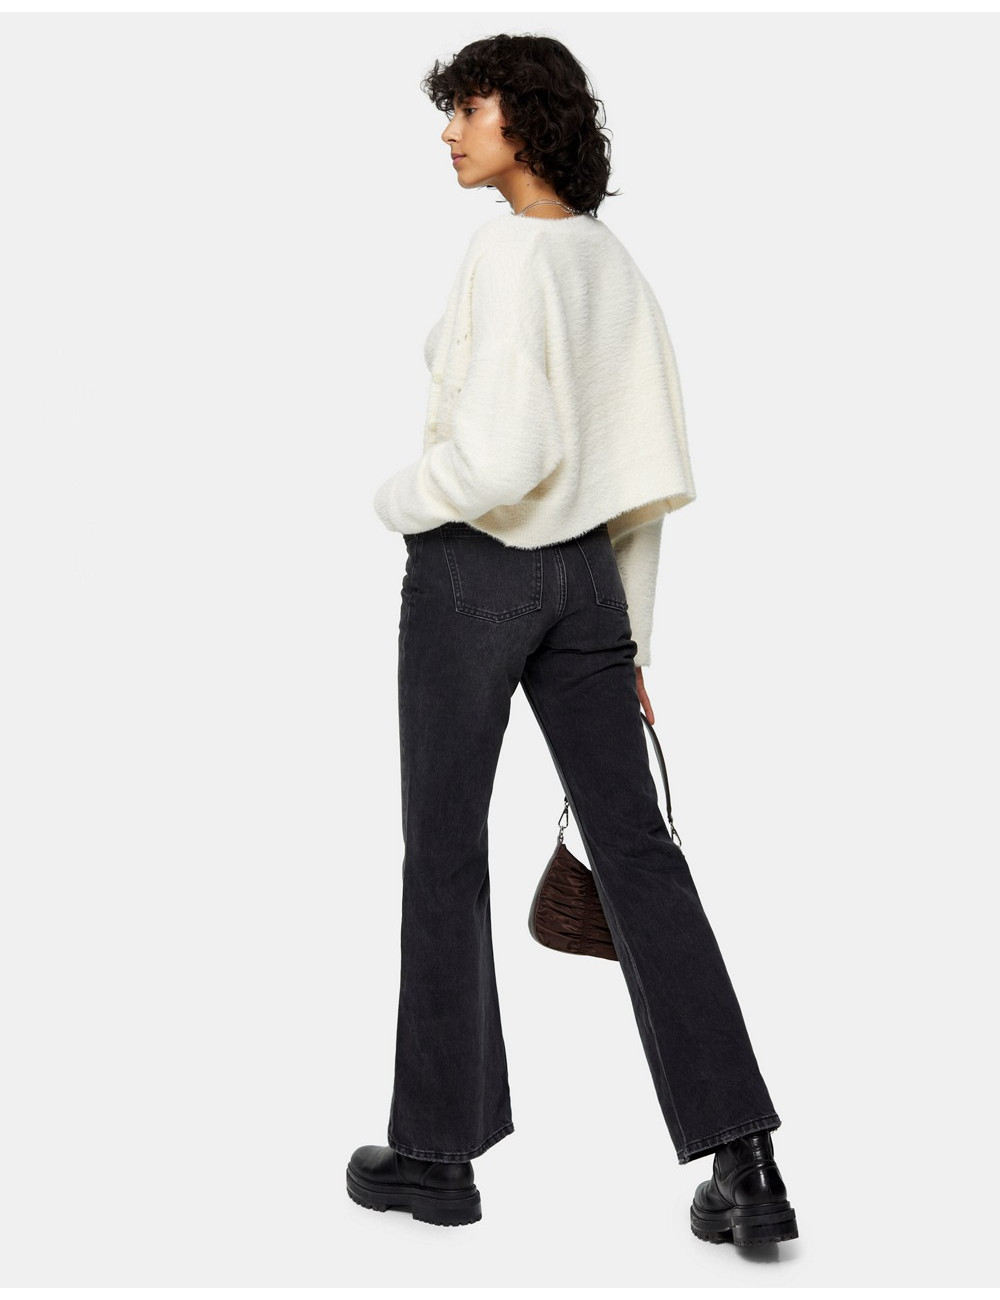 Topshop 90s flare jeans in...